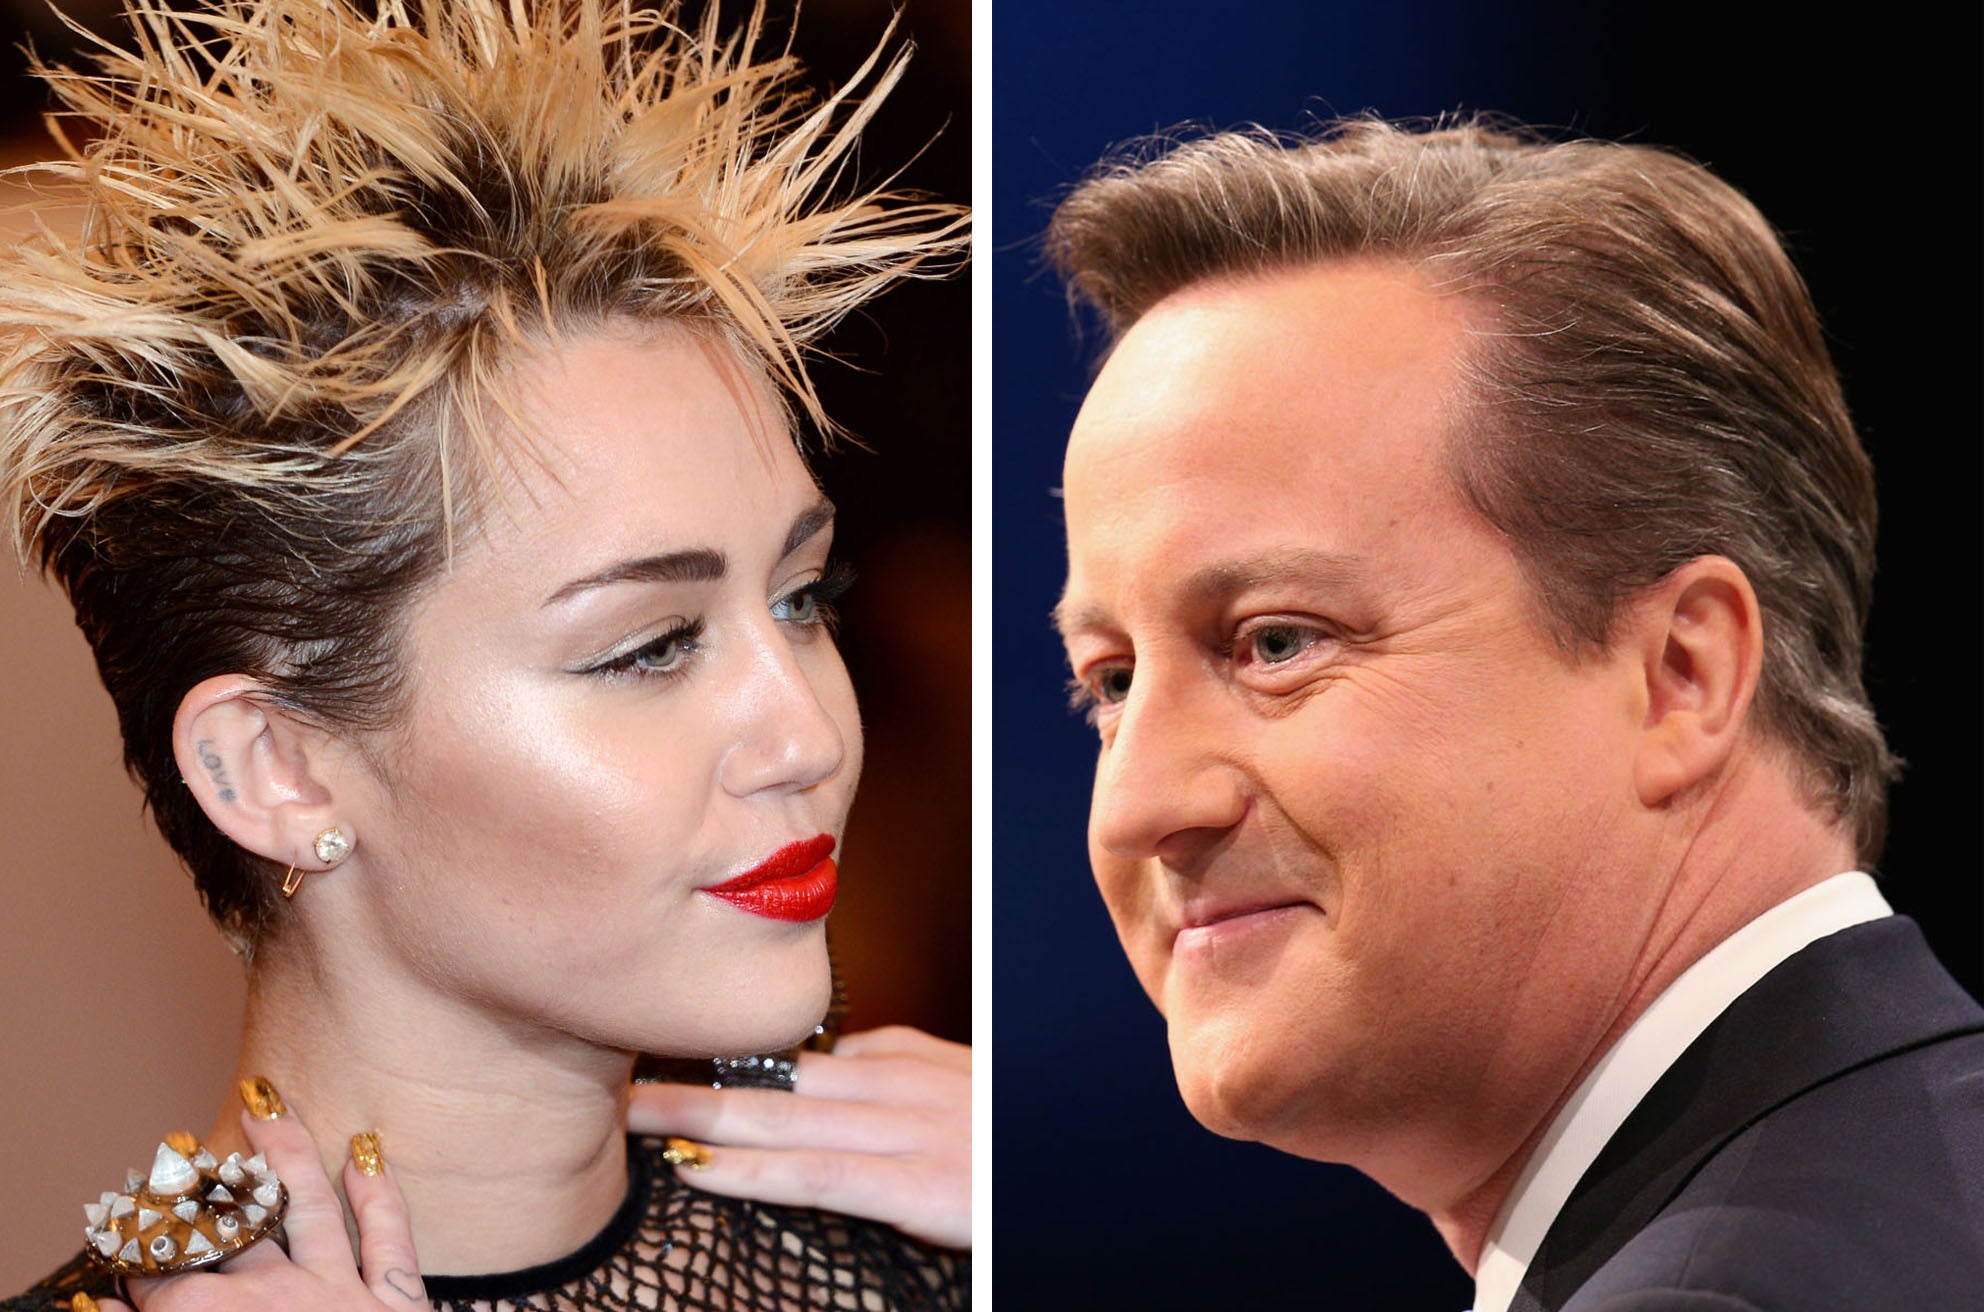 Always late to the party, but arriving none-the-less, David Cameron has become the latest person of note to to wade in on the great Miley Cyrus debate.